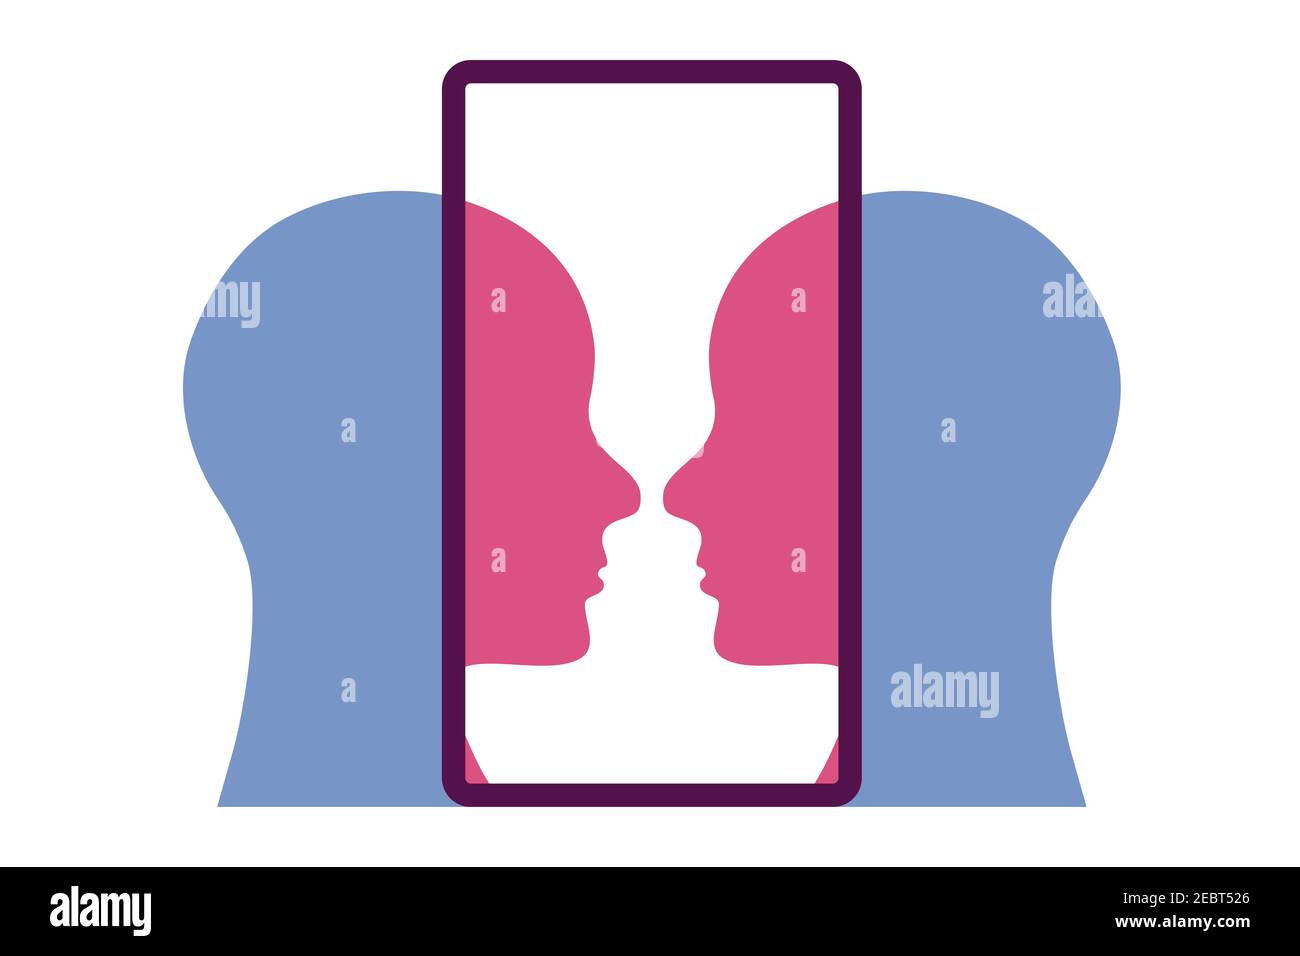 Video call abstract concept logo. Two persons talking face to face. Illustration of two people talking on a smart phone screen, cut out vector. Stock Vector